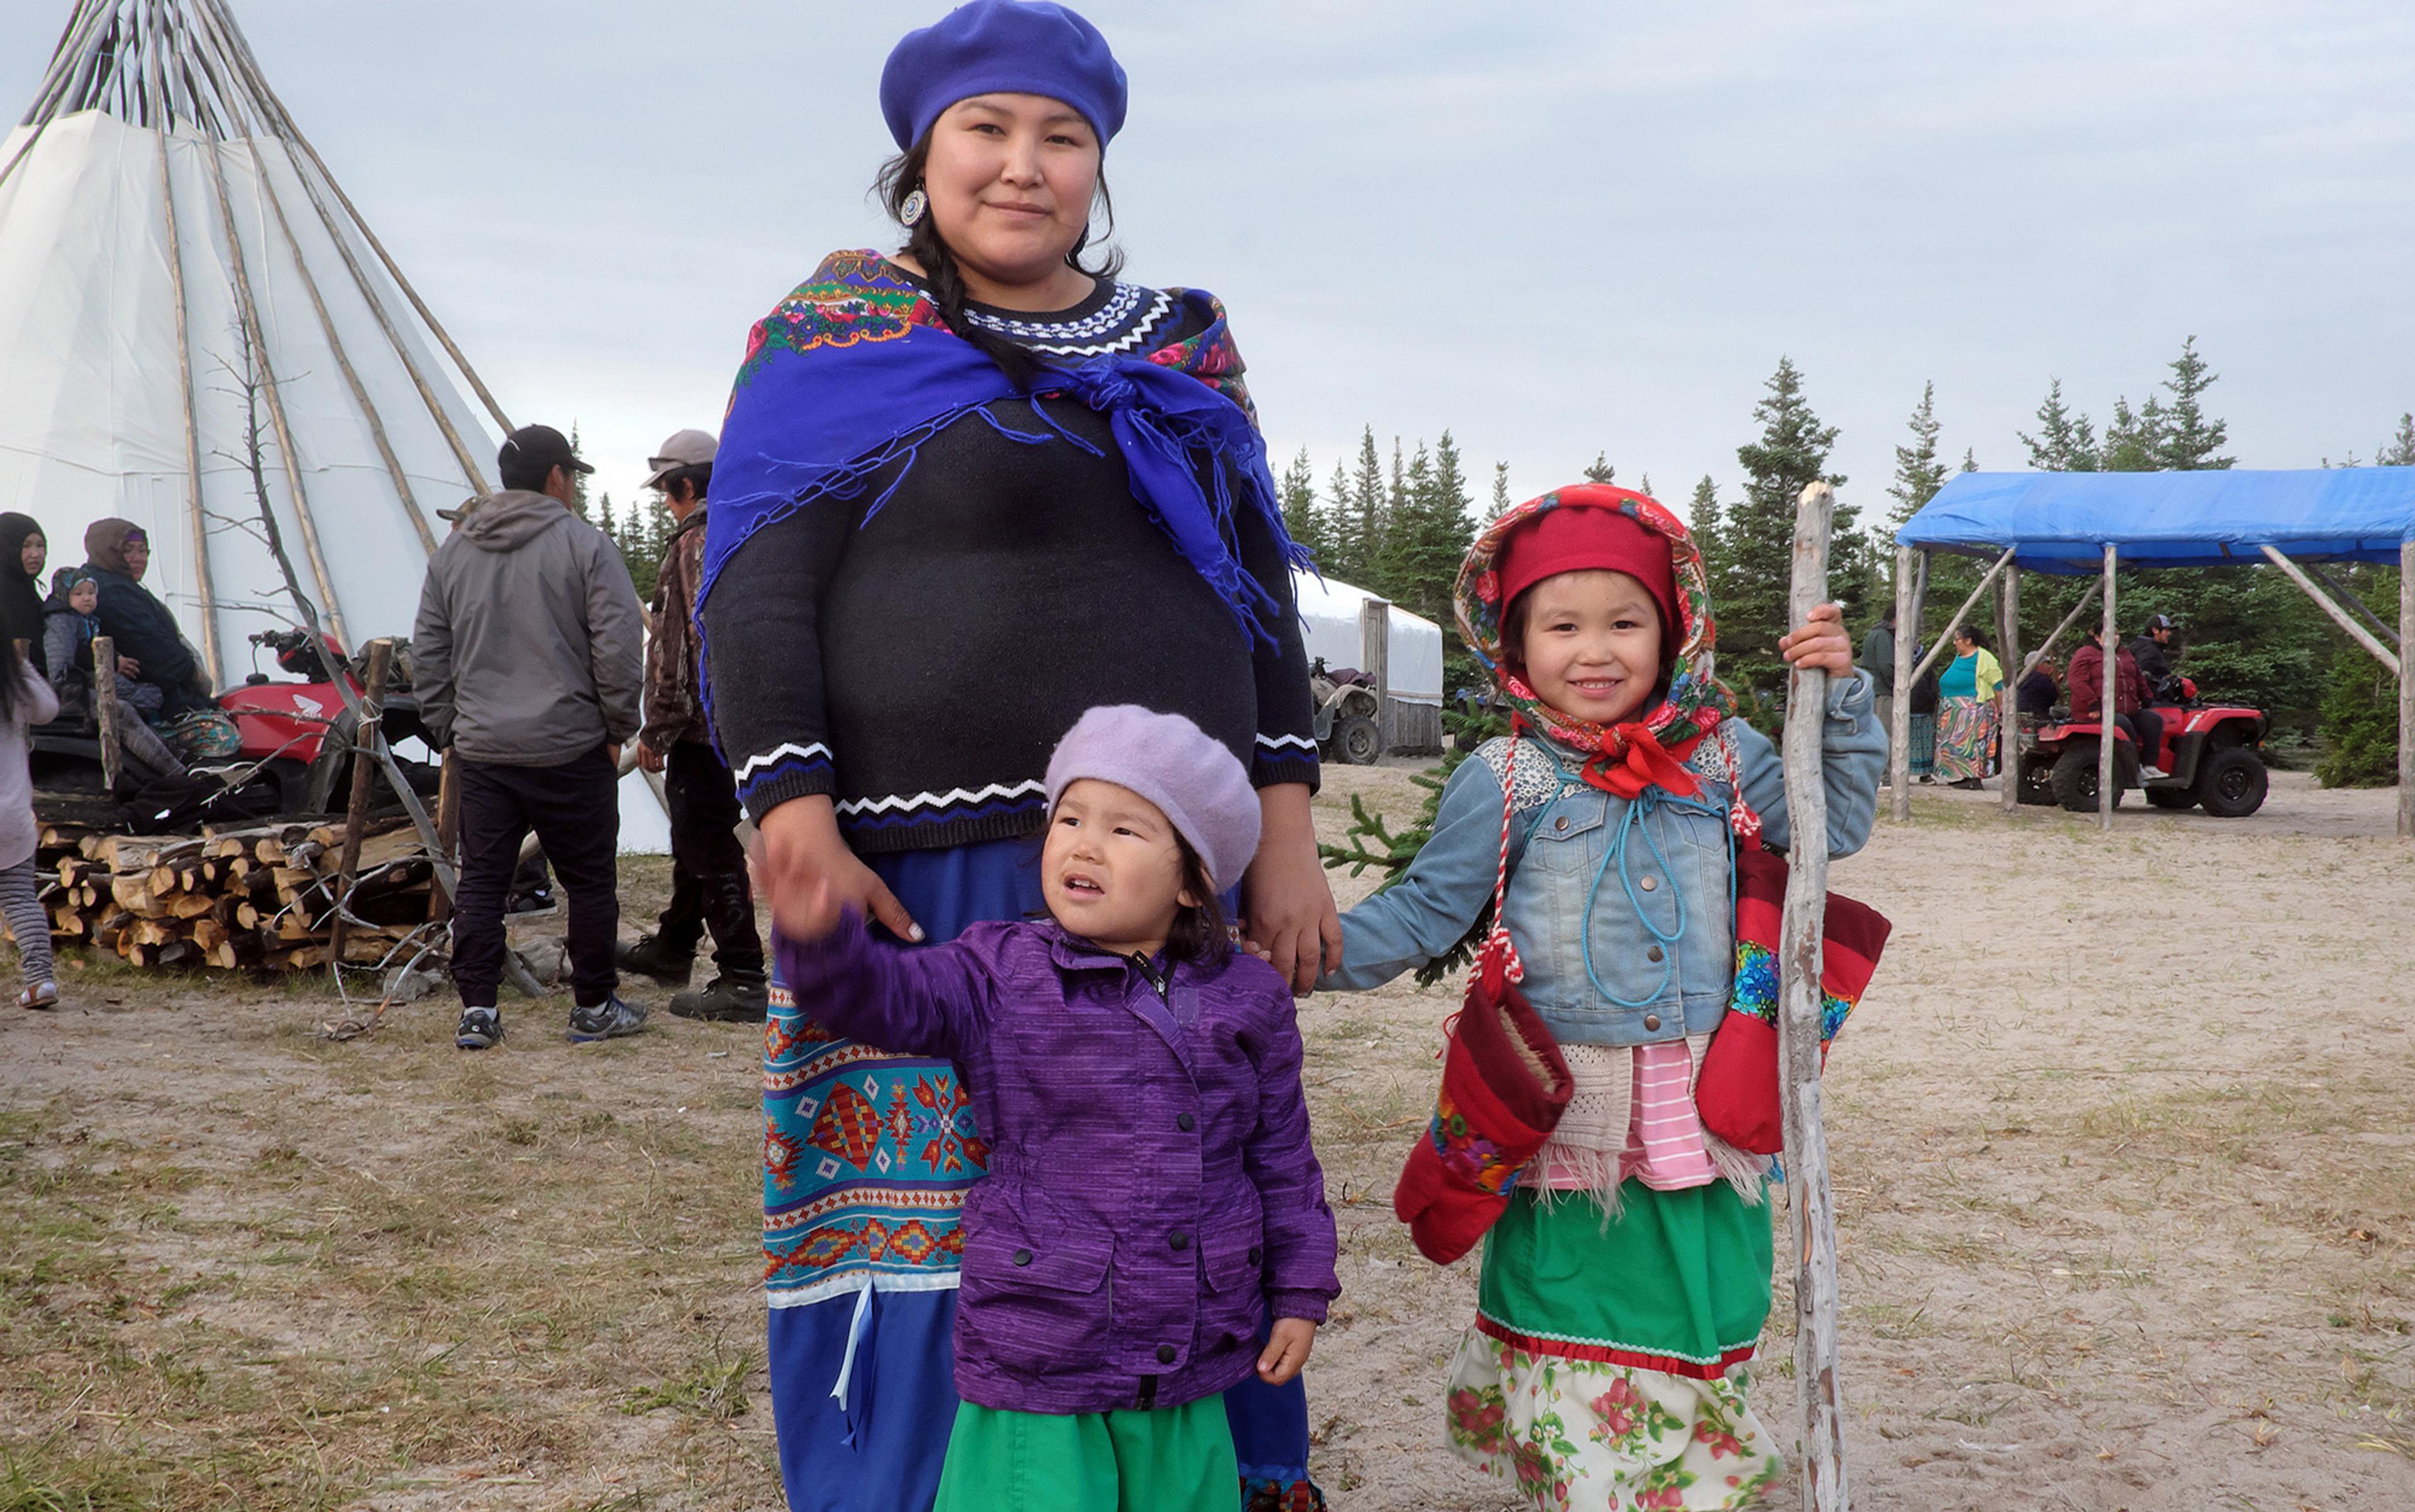 A woman and two children dressed in traditional First Nations clothing stand in front of a teepee structure